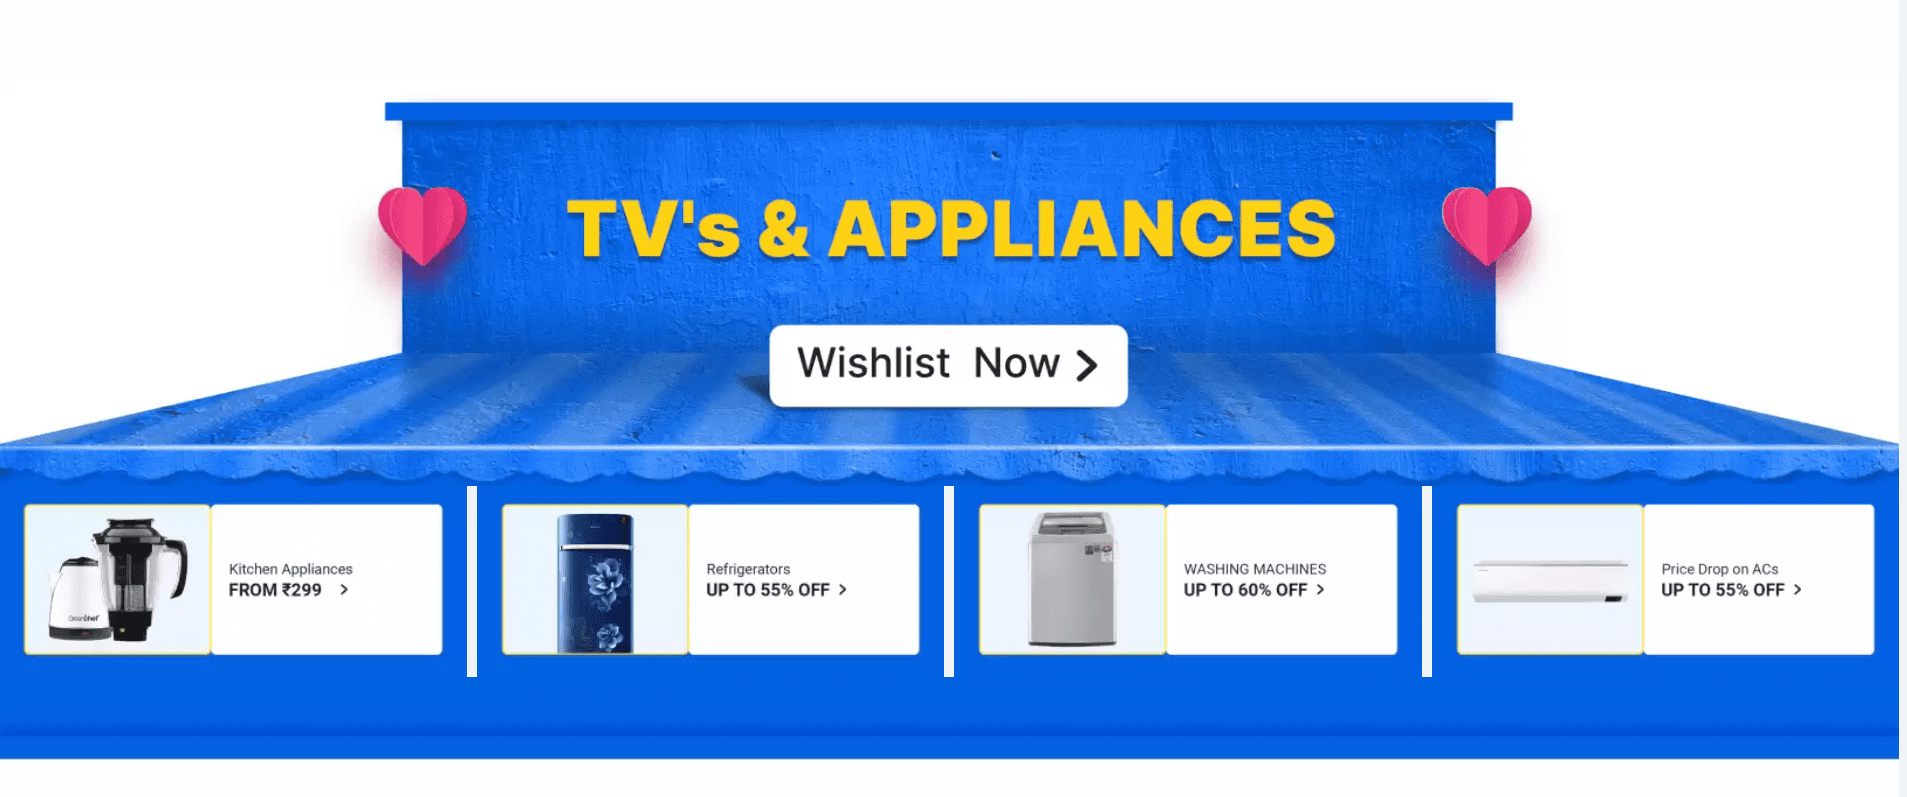 Offers on TV & Appliances